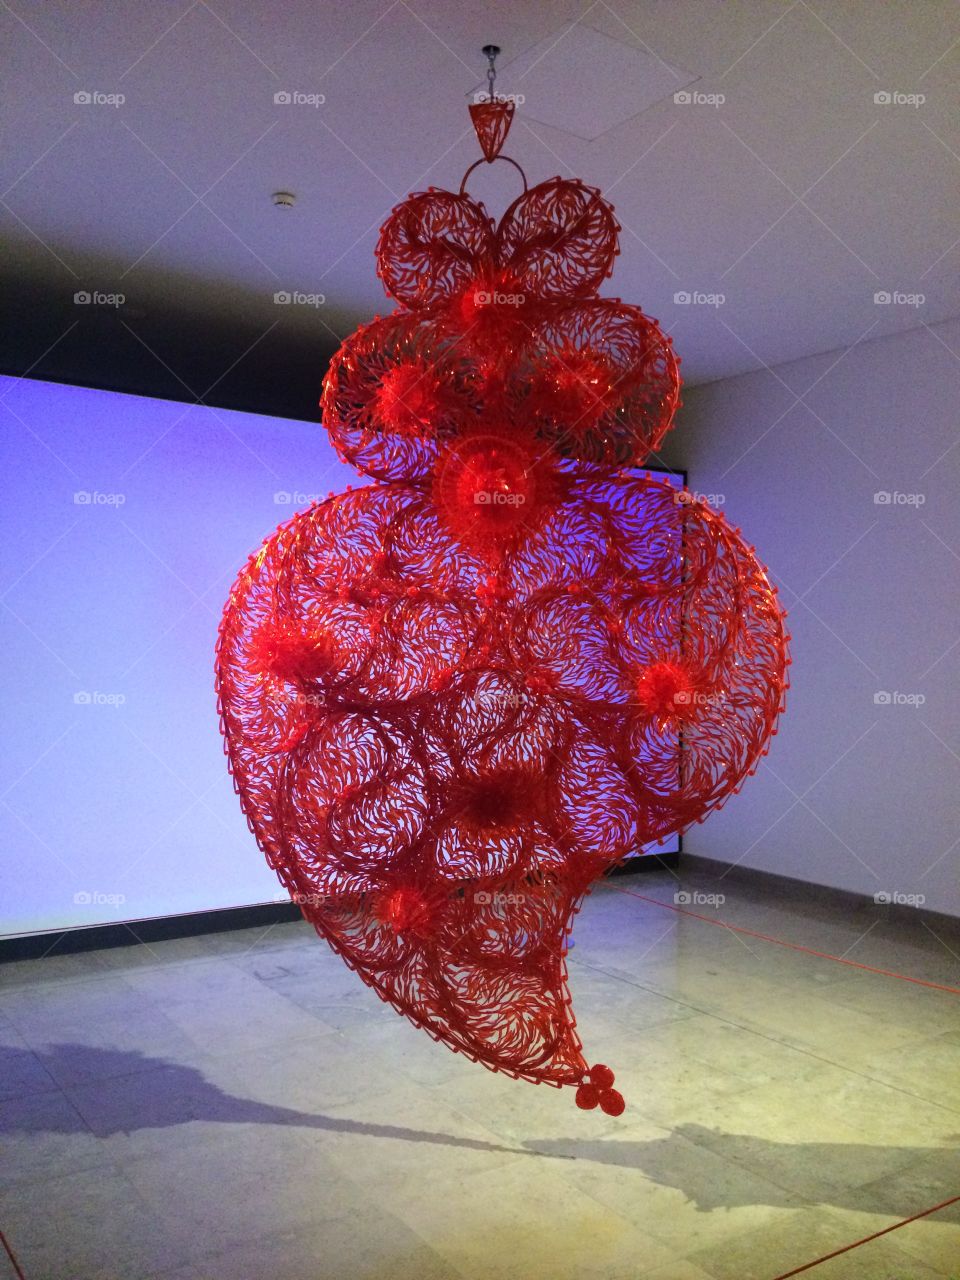 Heart made with plastic spoons and forks by Joana Vasconcelos.